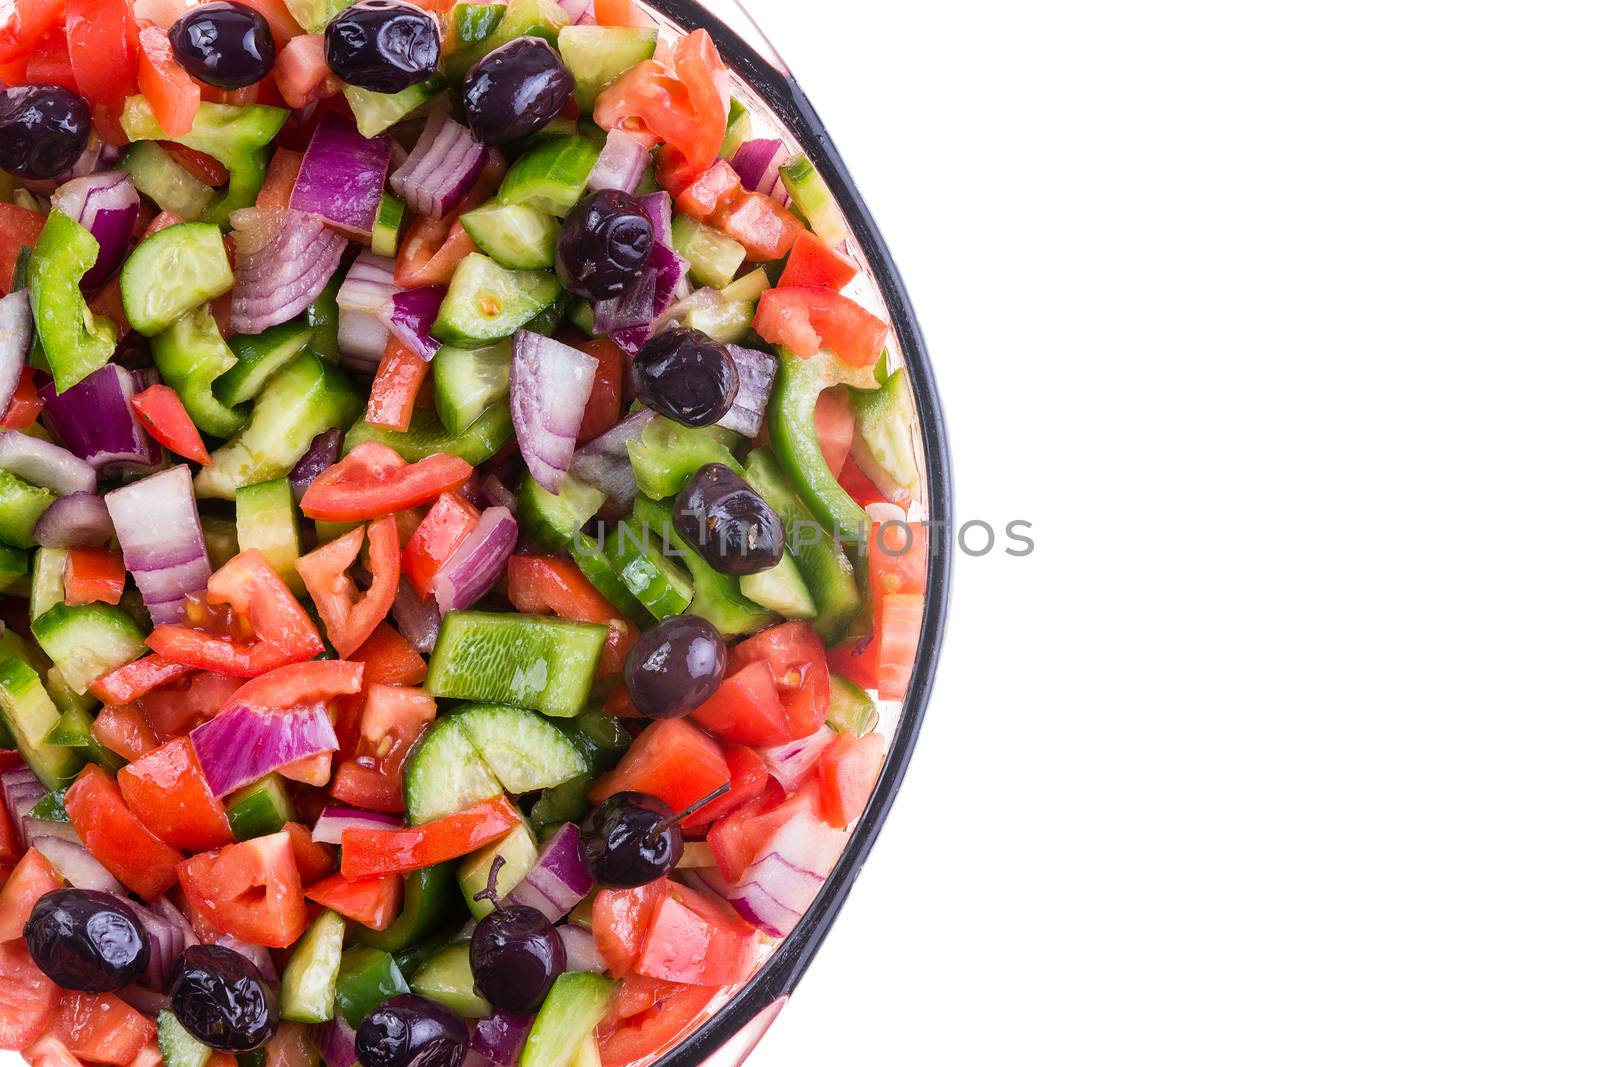 Colorful healthy Turkish shepherd salad with assorted diced fresh vegetables served in a round bowl view close up from overhead over white with copy space on the right